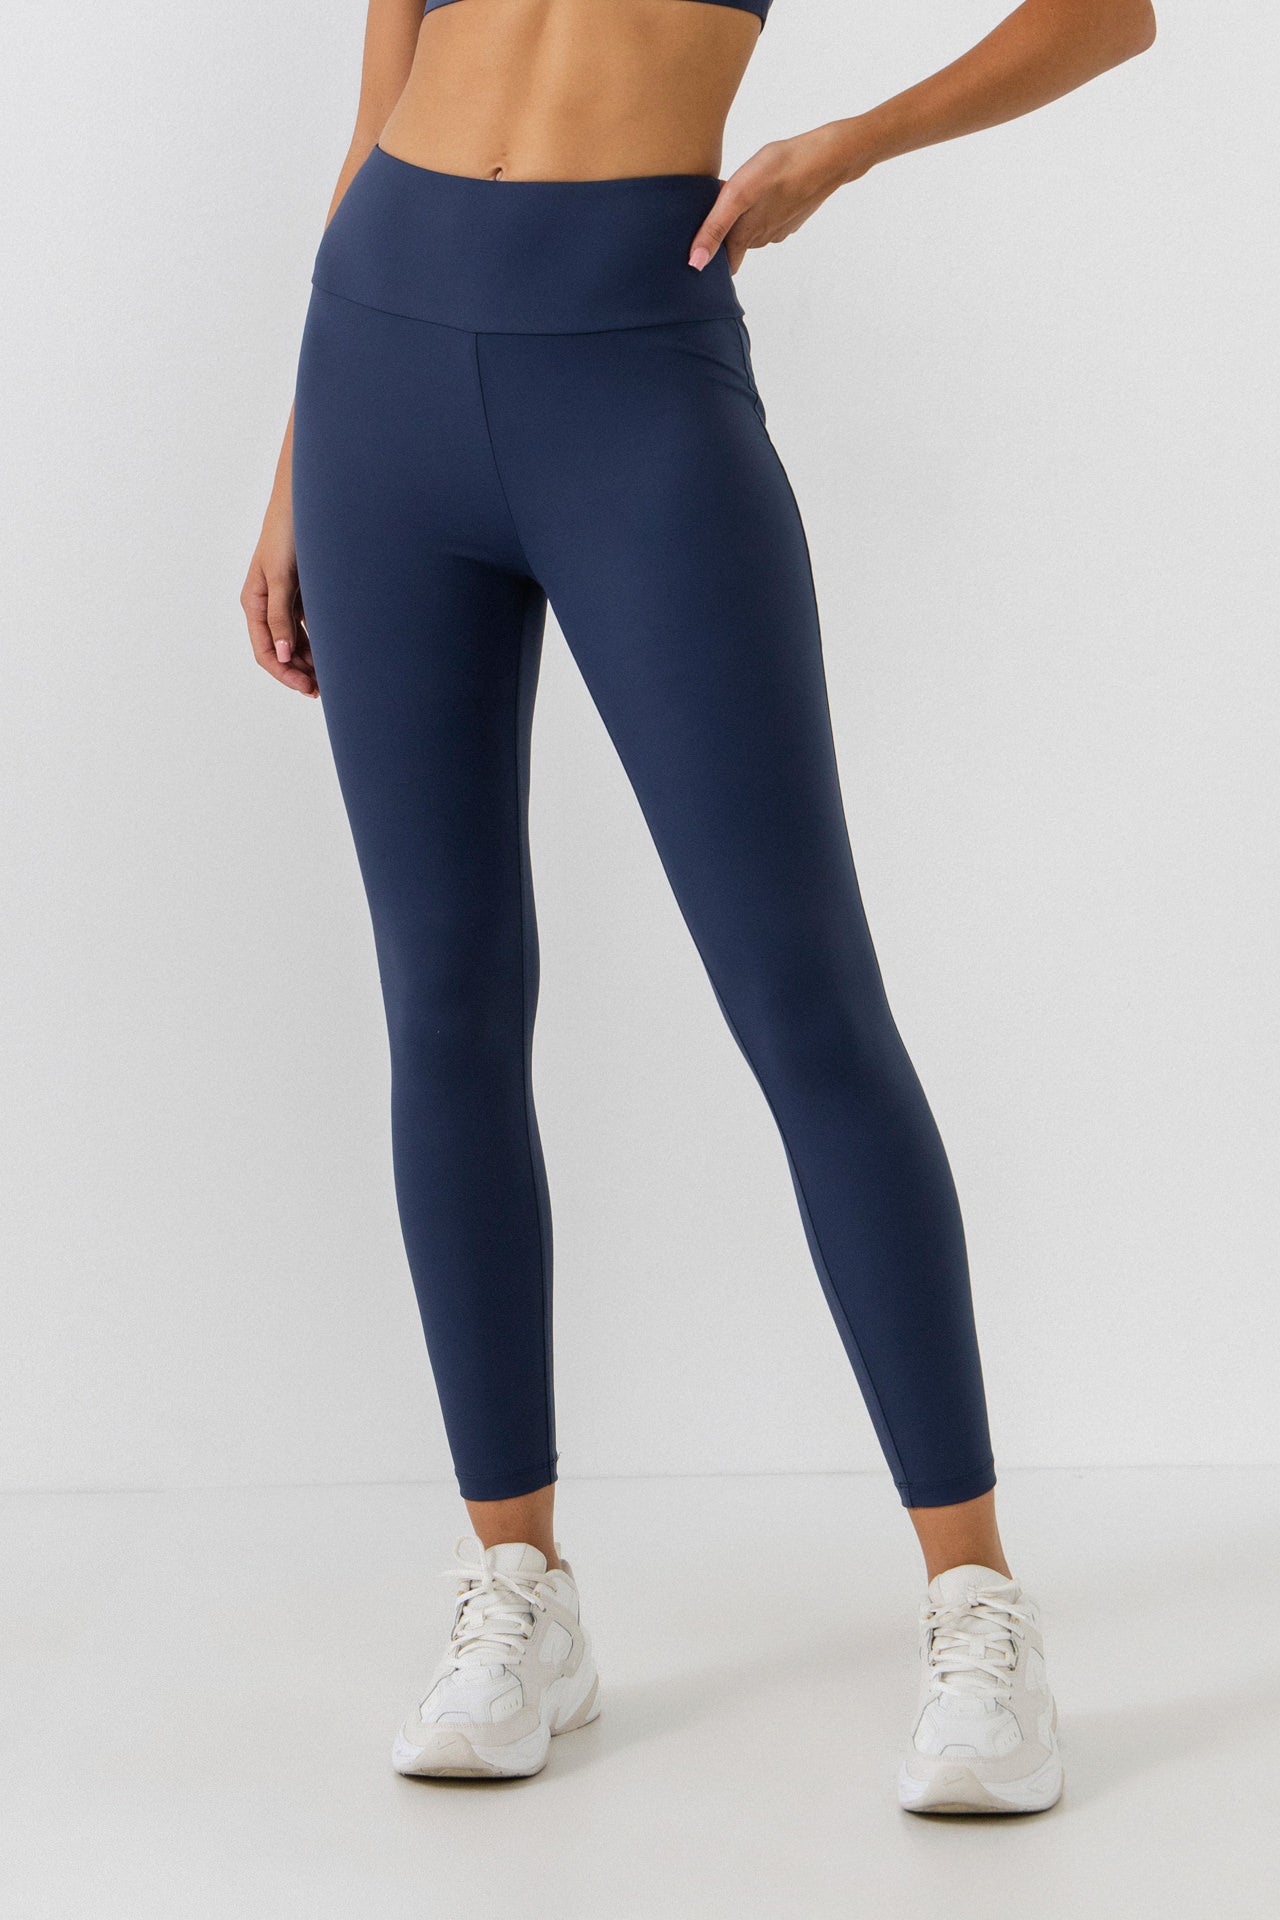 Finding Nirvana High Waist Legging In Navy Curves • Impressions Online  Boutique